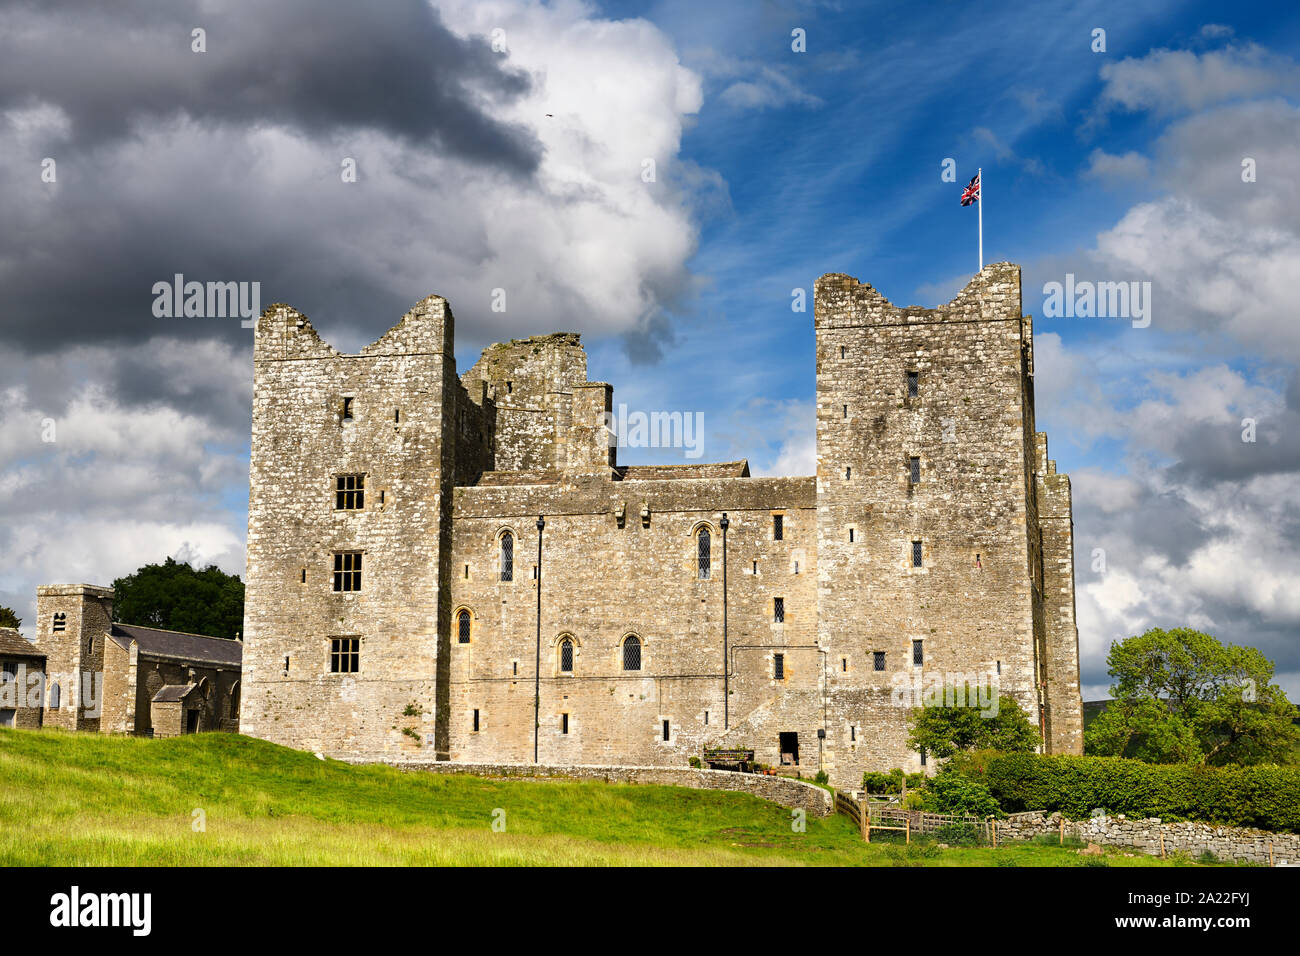 West side of 14th-century Bolton Castle in sun with British flag Wensleydale Yorkshire England Stock Photo